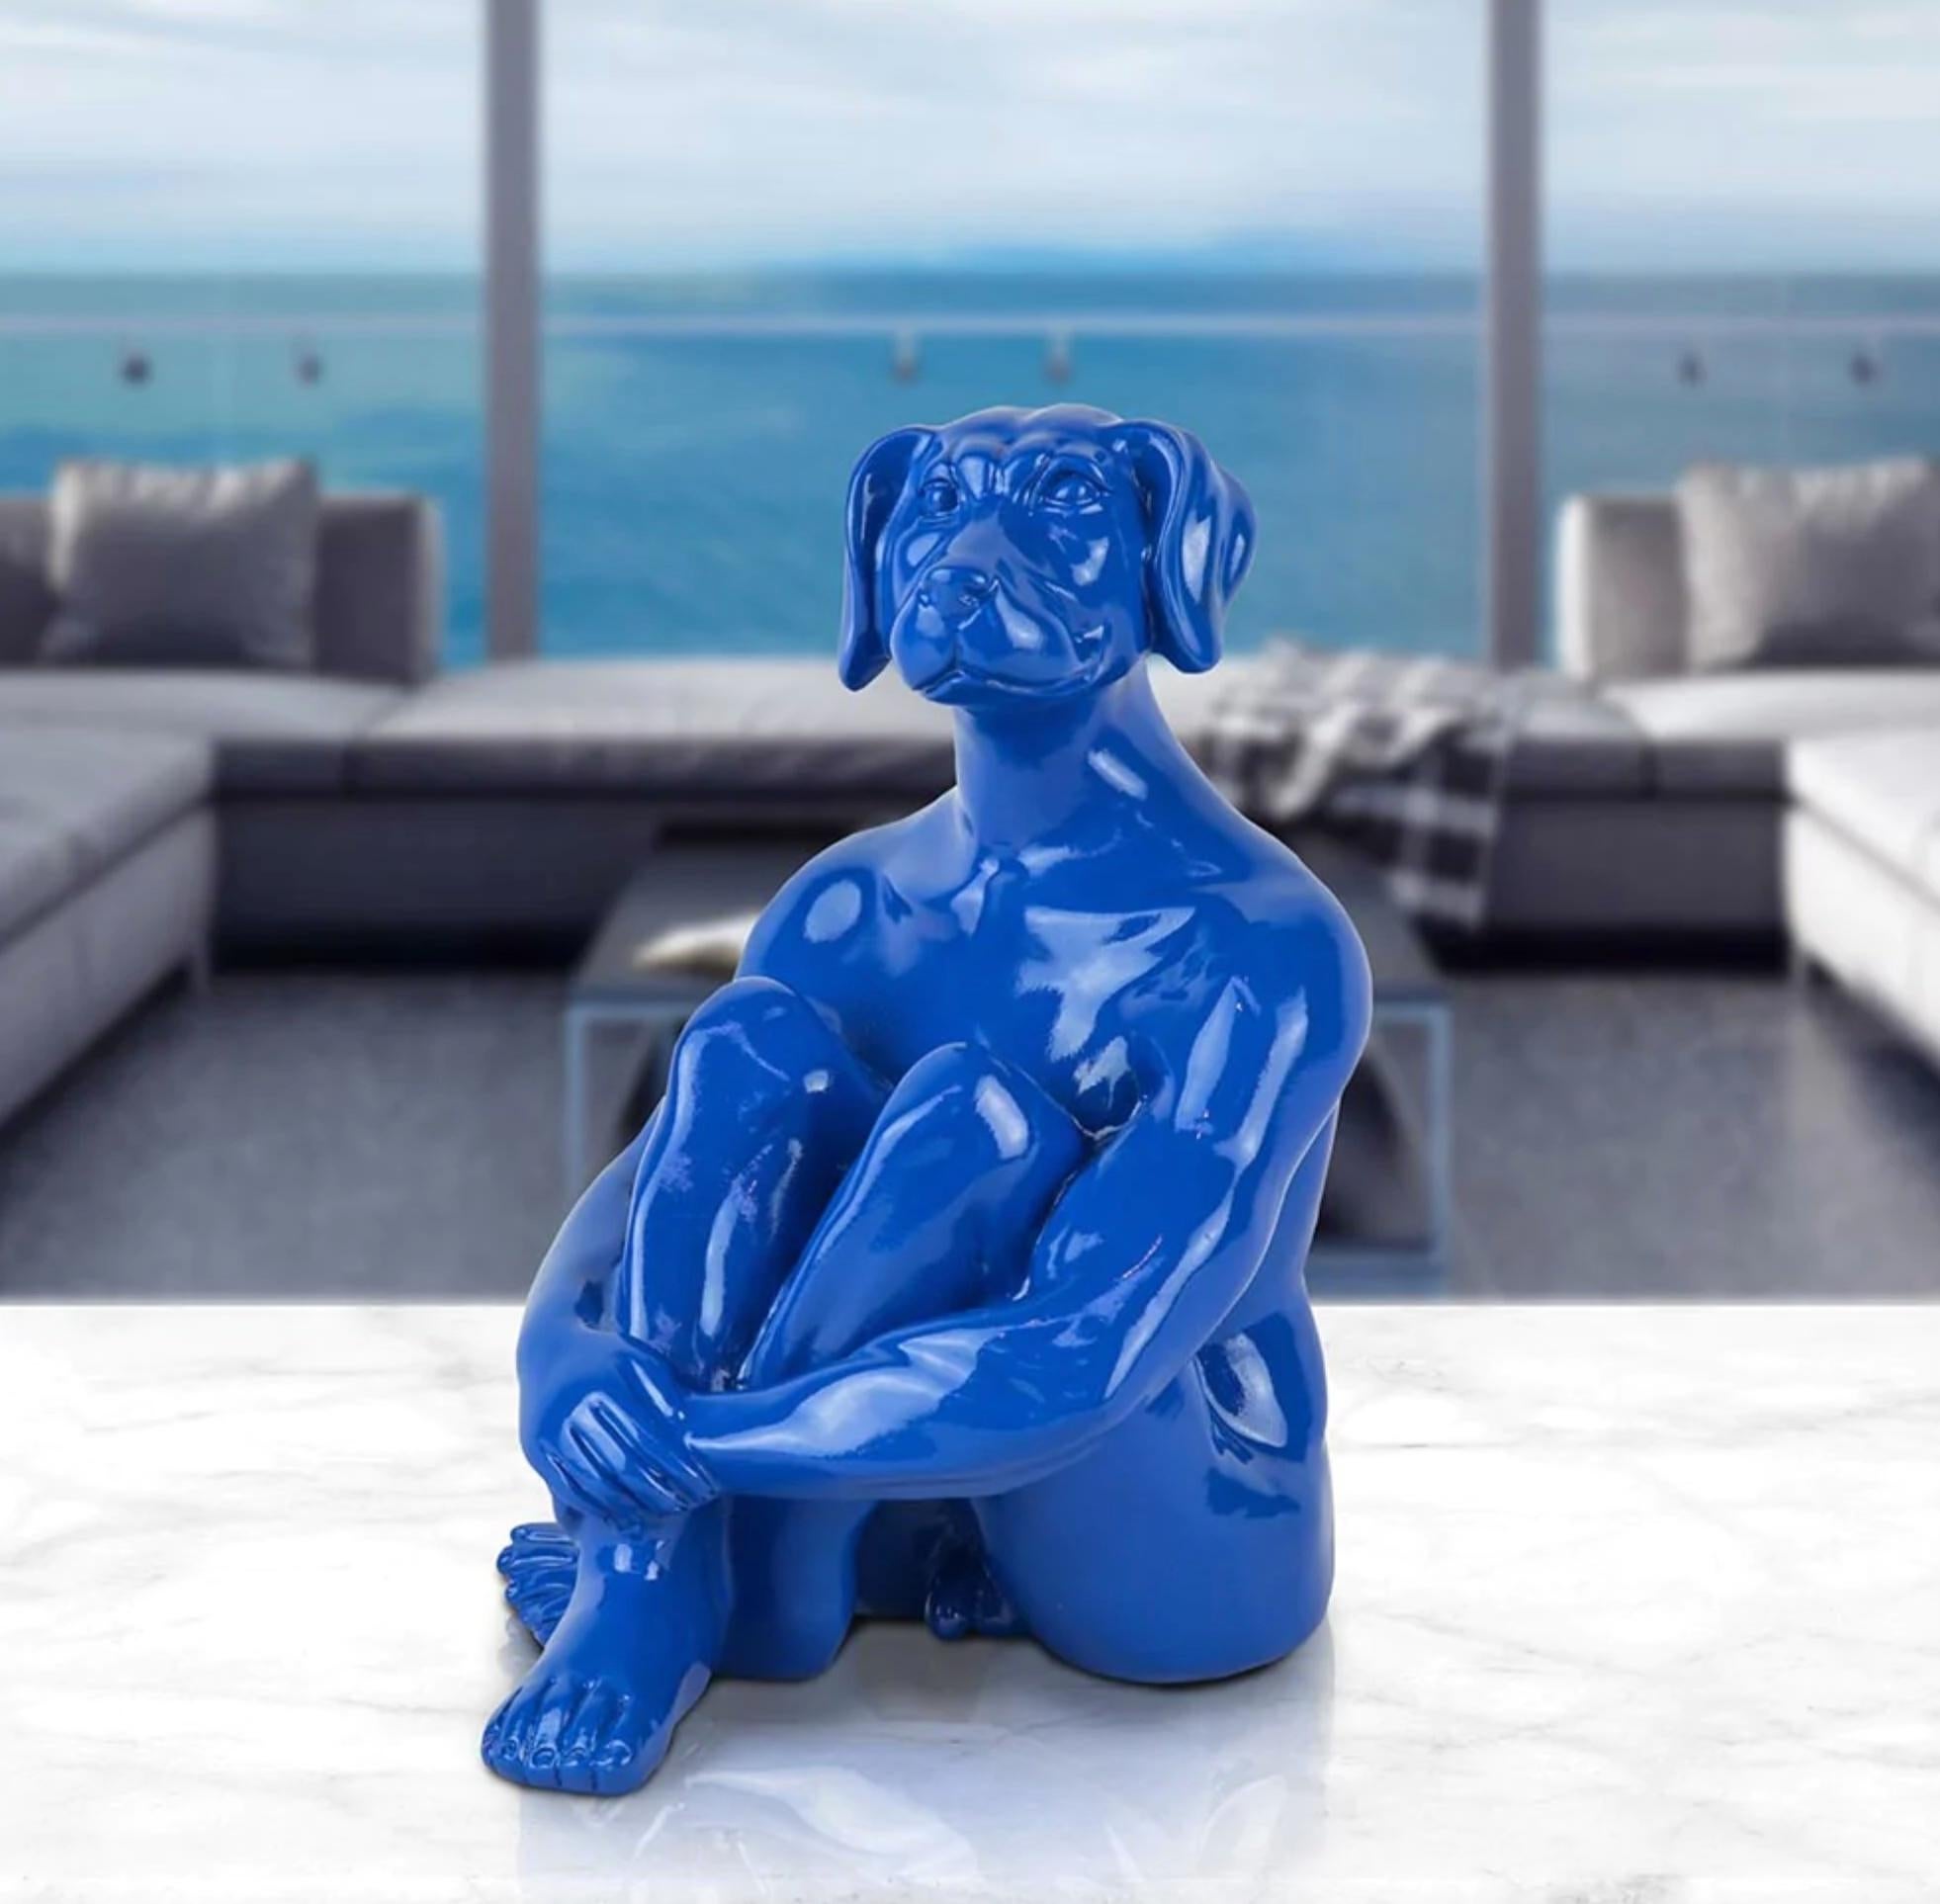 Authentic Limited Ed. Blue Resin Cool Mini Dogman Sculpture by Gillie and Marc - Art by Gillie and Marc Schattner